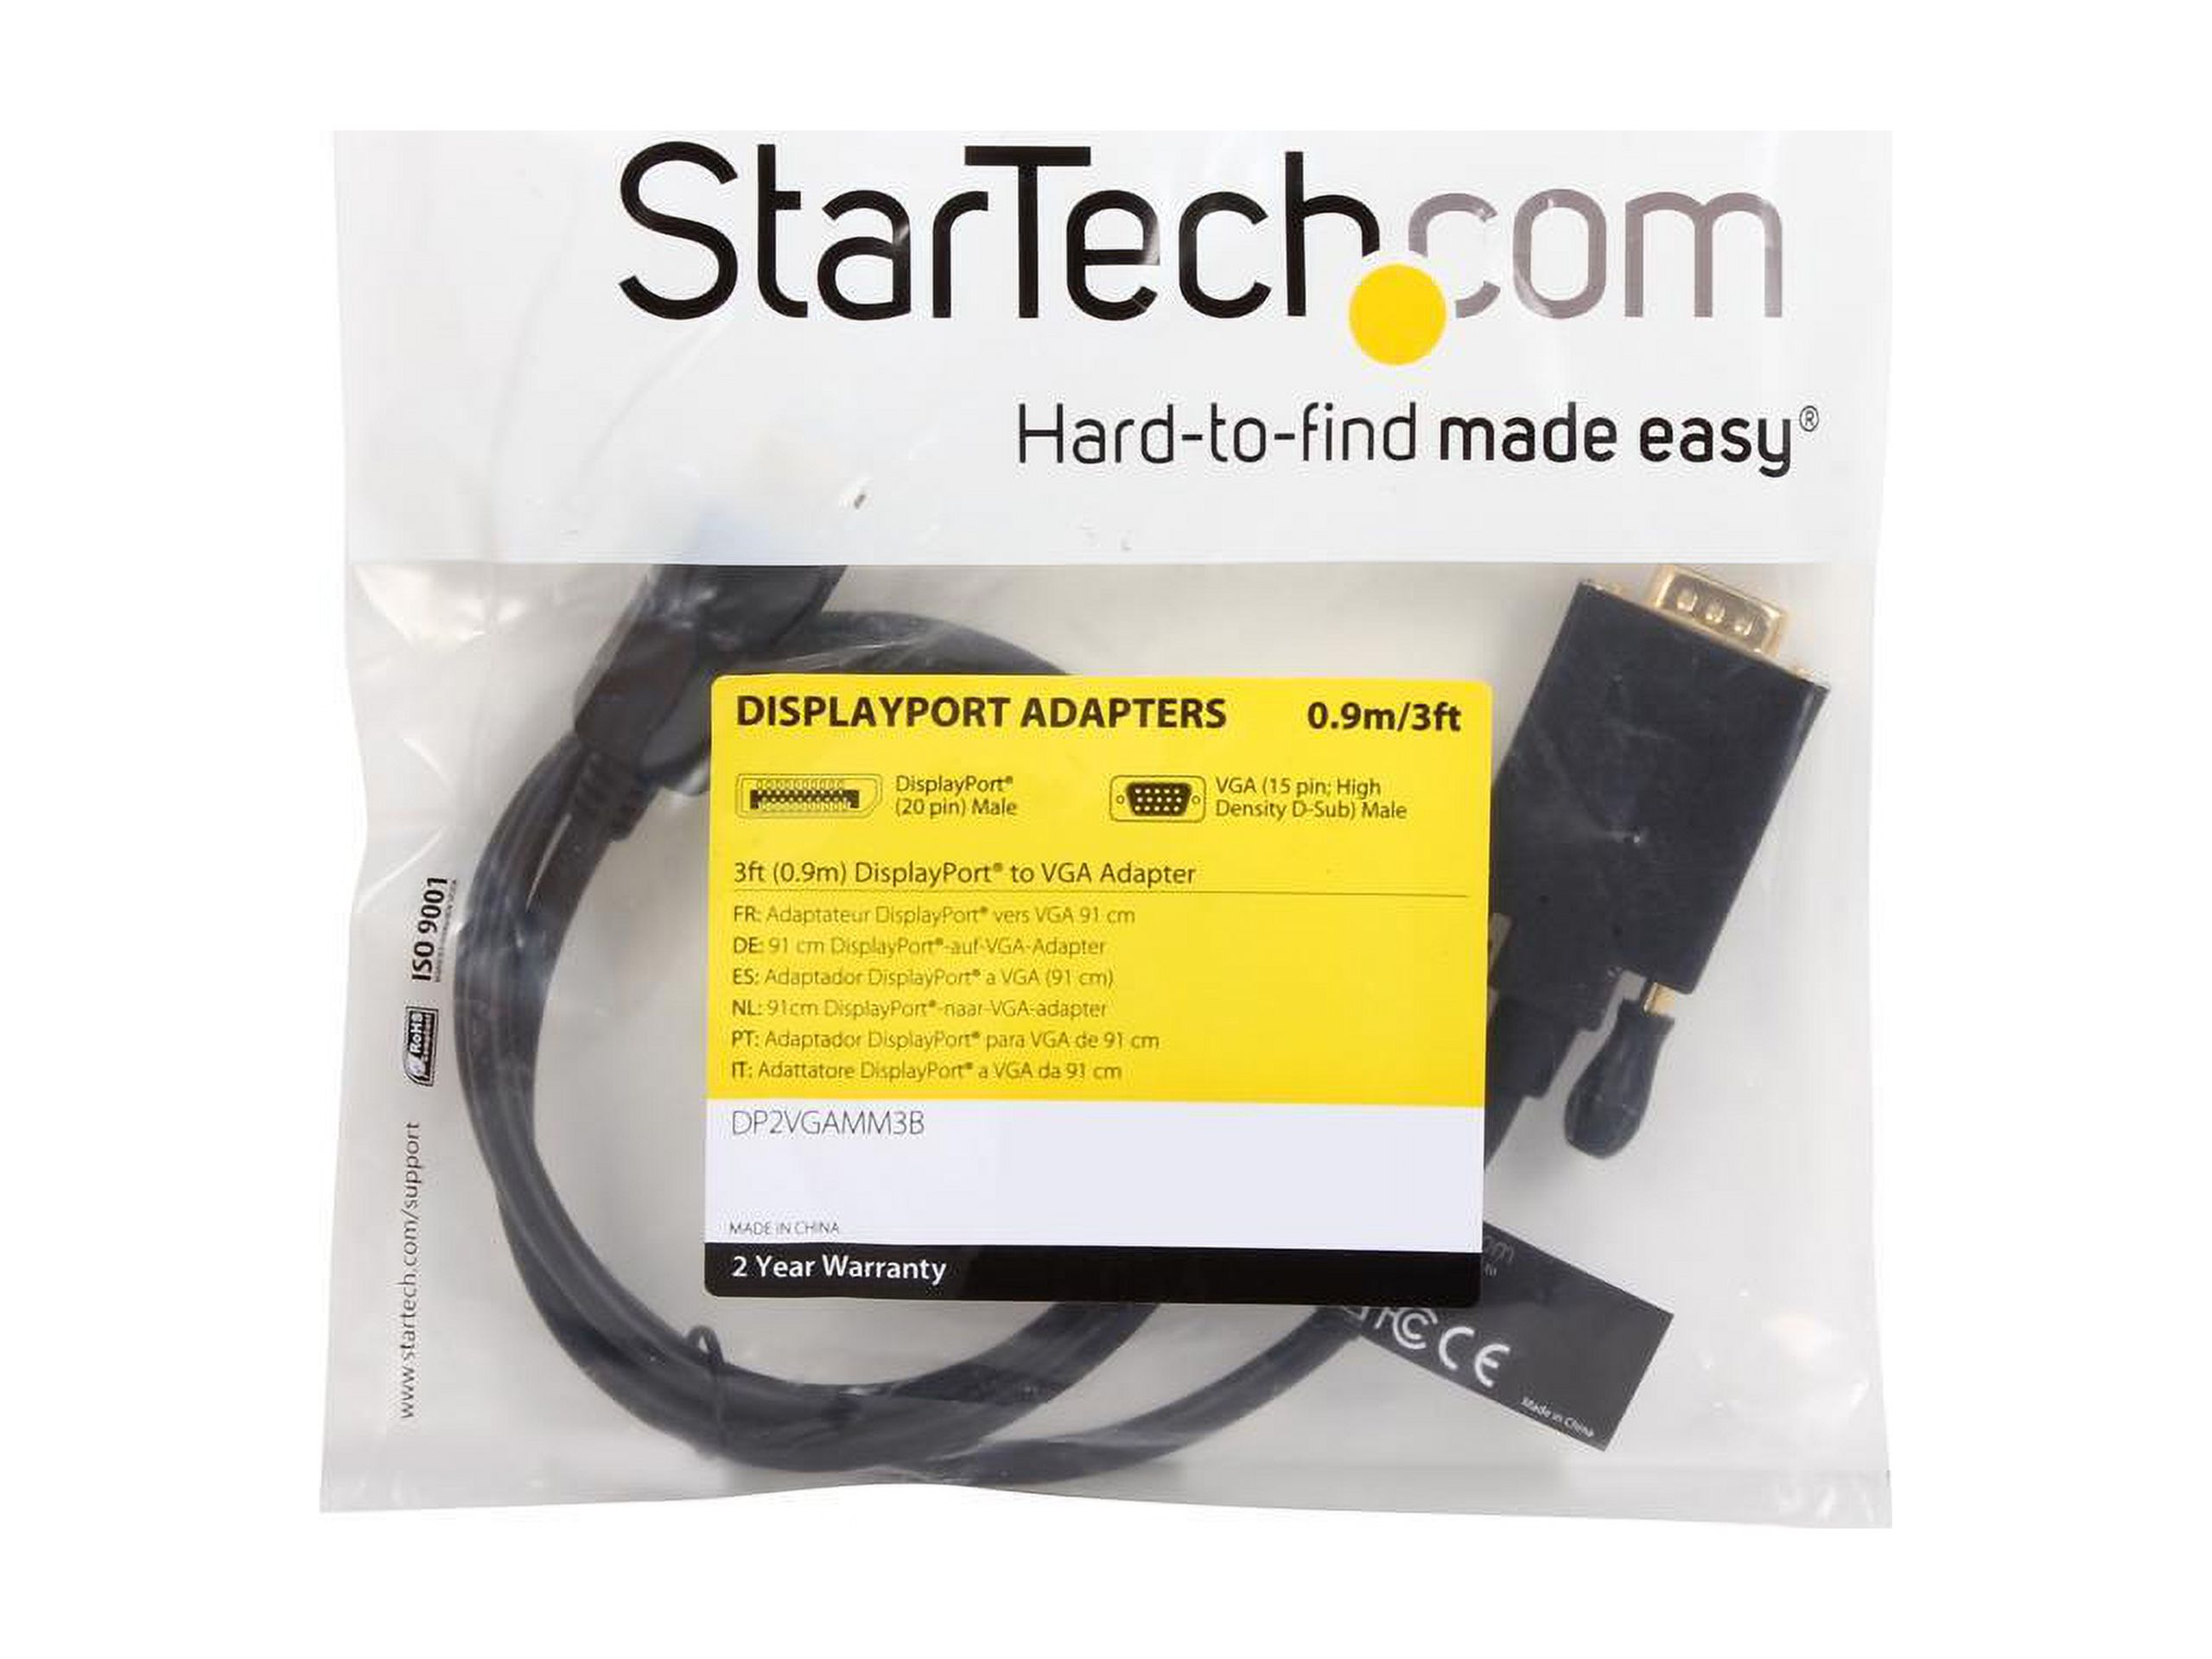 StarTech DP2VGAMM3B 3 ft. DisplayPort to VGA Adapter Cable - DP to VGA Video Converter - Active DisplayPort to VGA Cable for PC 1920 x 1200 - Black - image 3 of 3